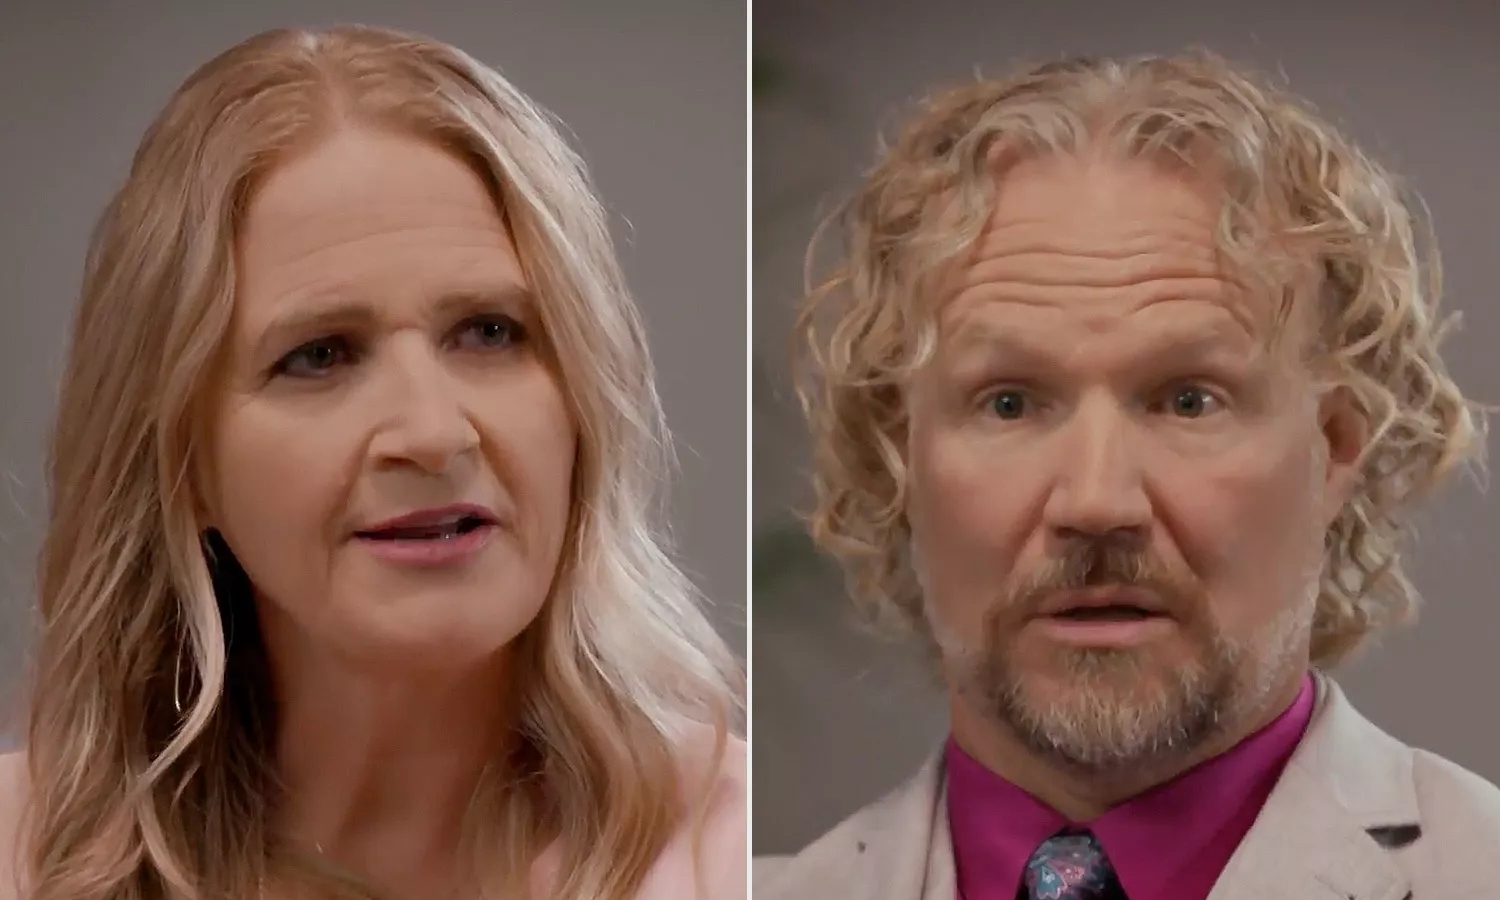 A split image of Christine Brown and Kody Brown during their segments of 'Sister Wives' Season 17 'One-on-One' reunion for TLC.